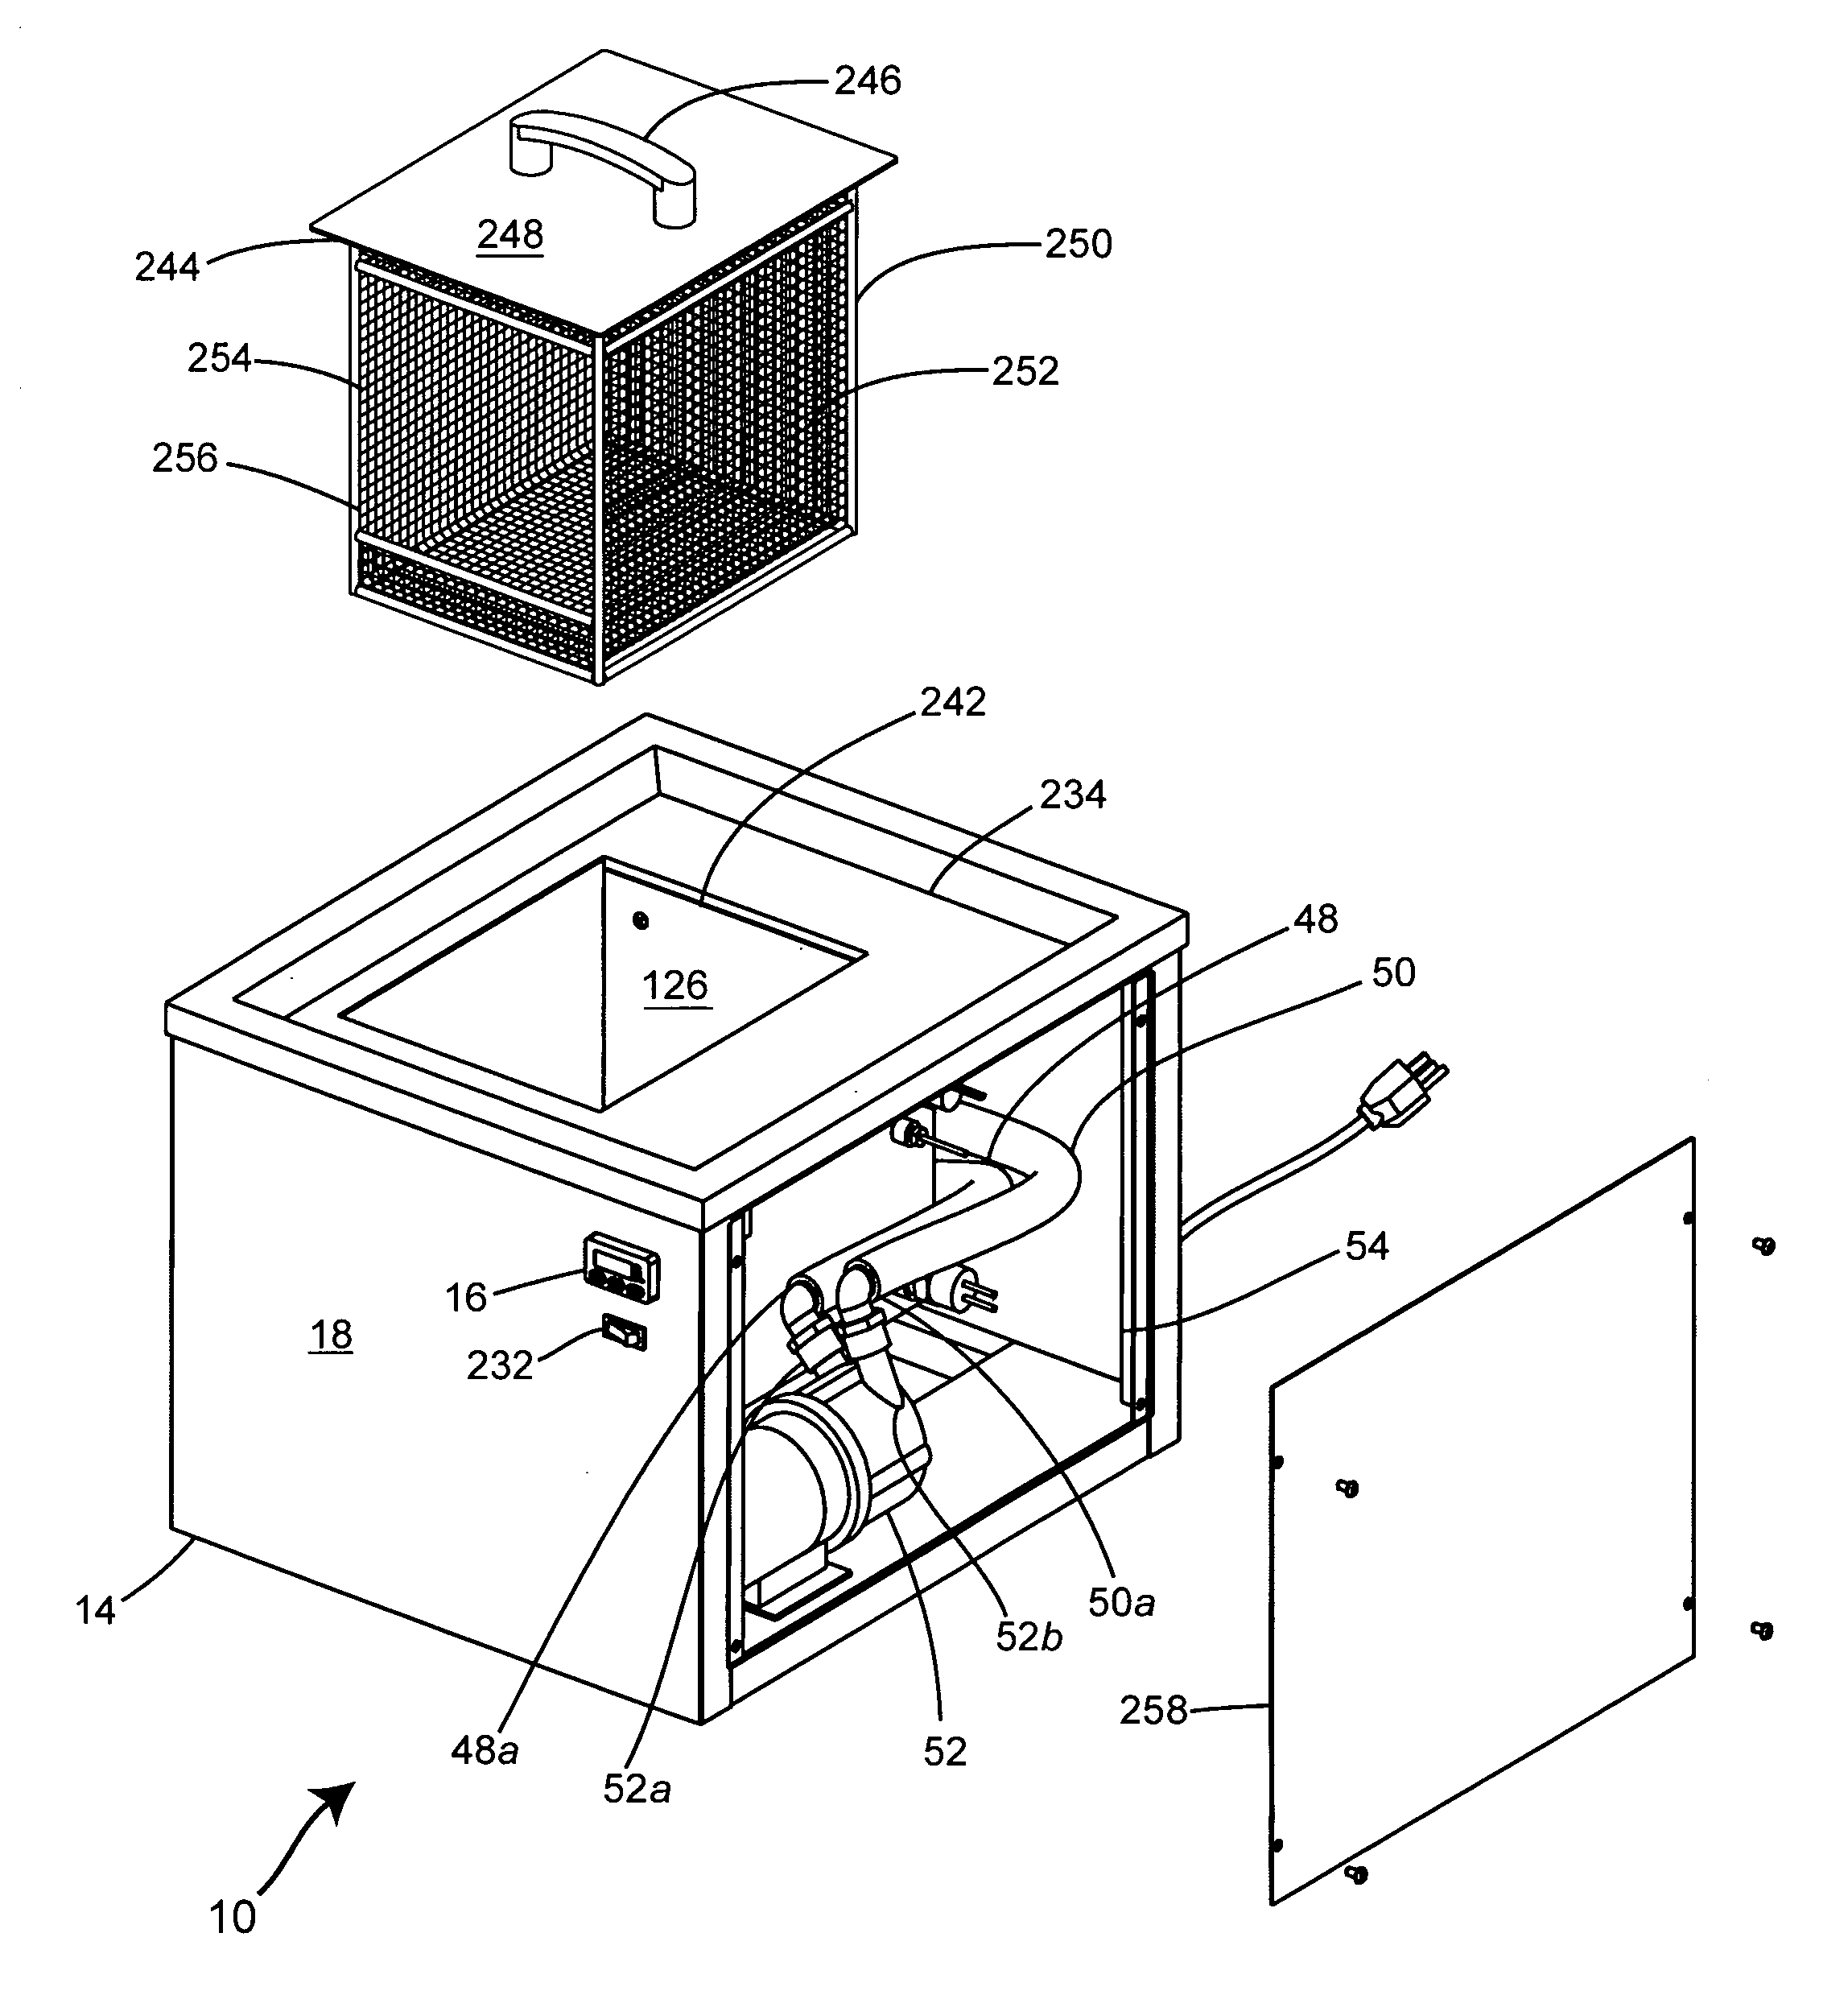 Apparatus for removing water-soluble support material from one or more rapid prototype parts